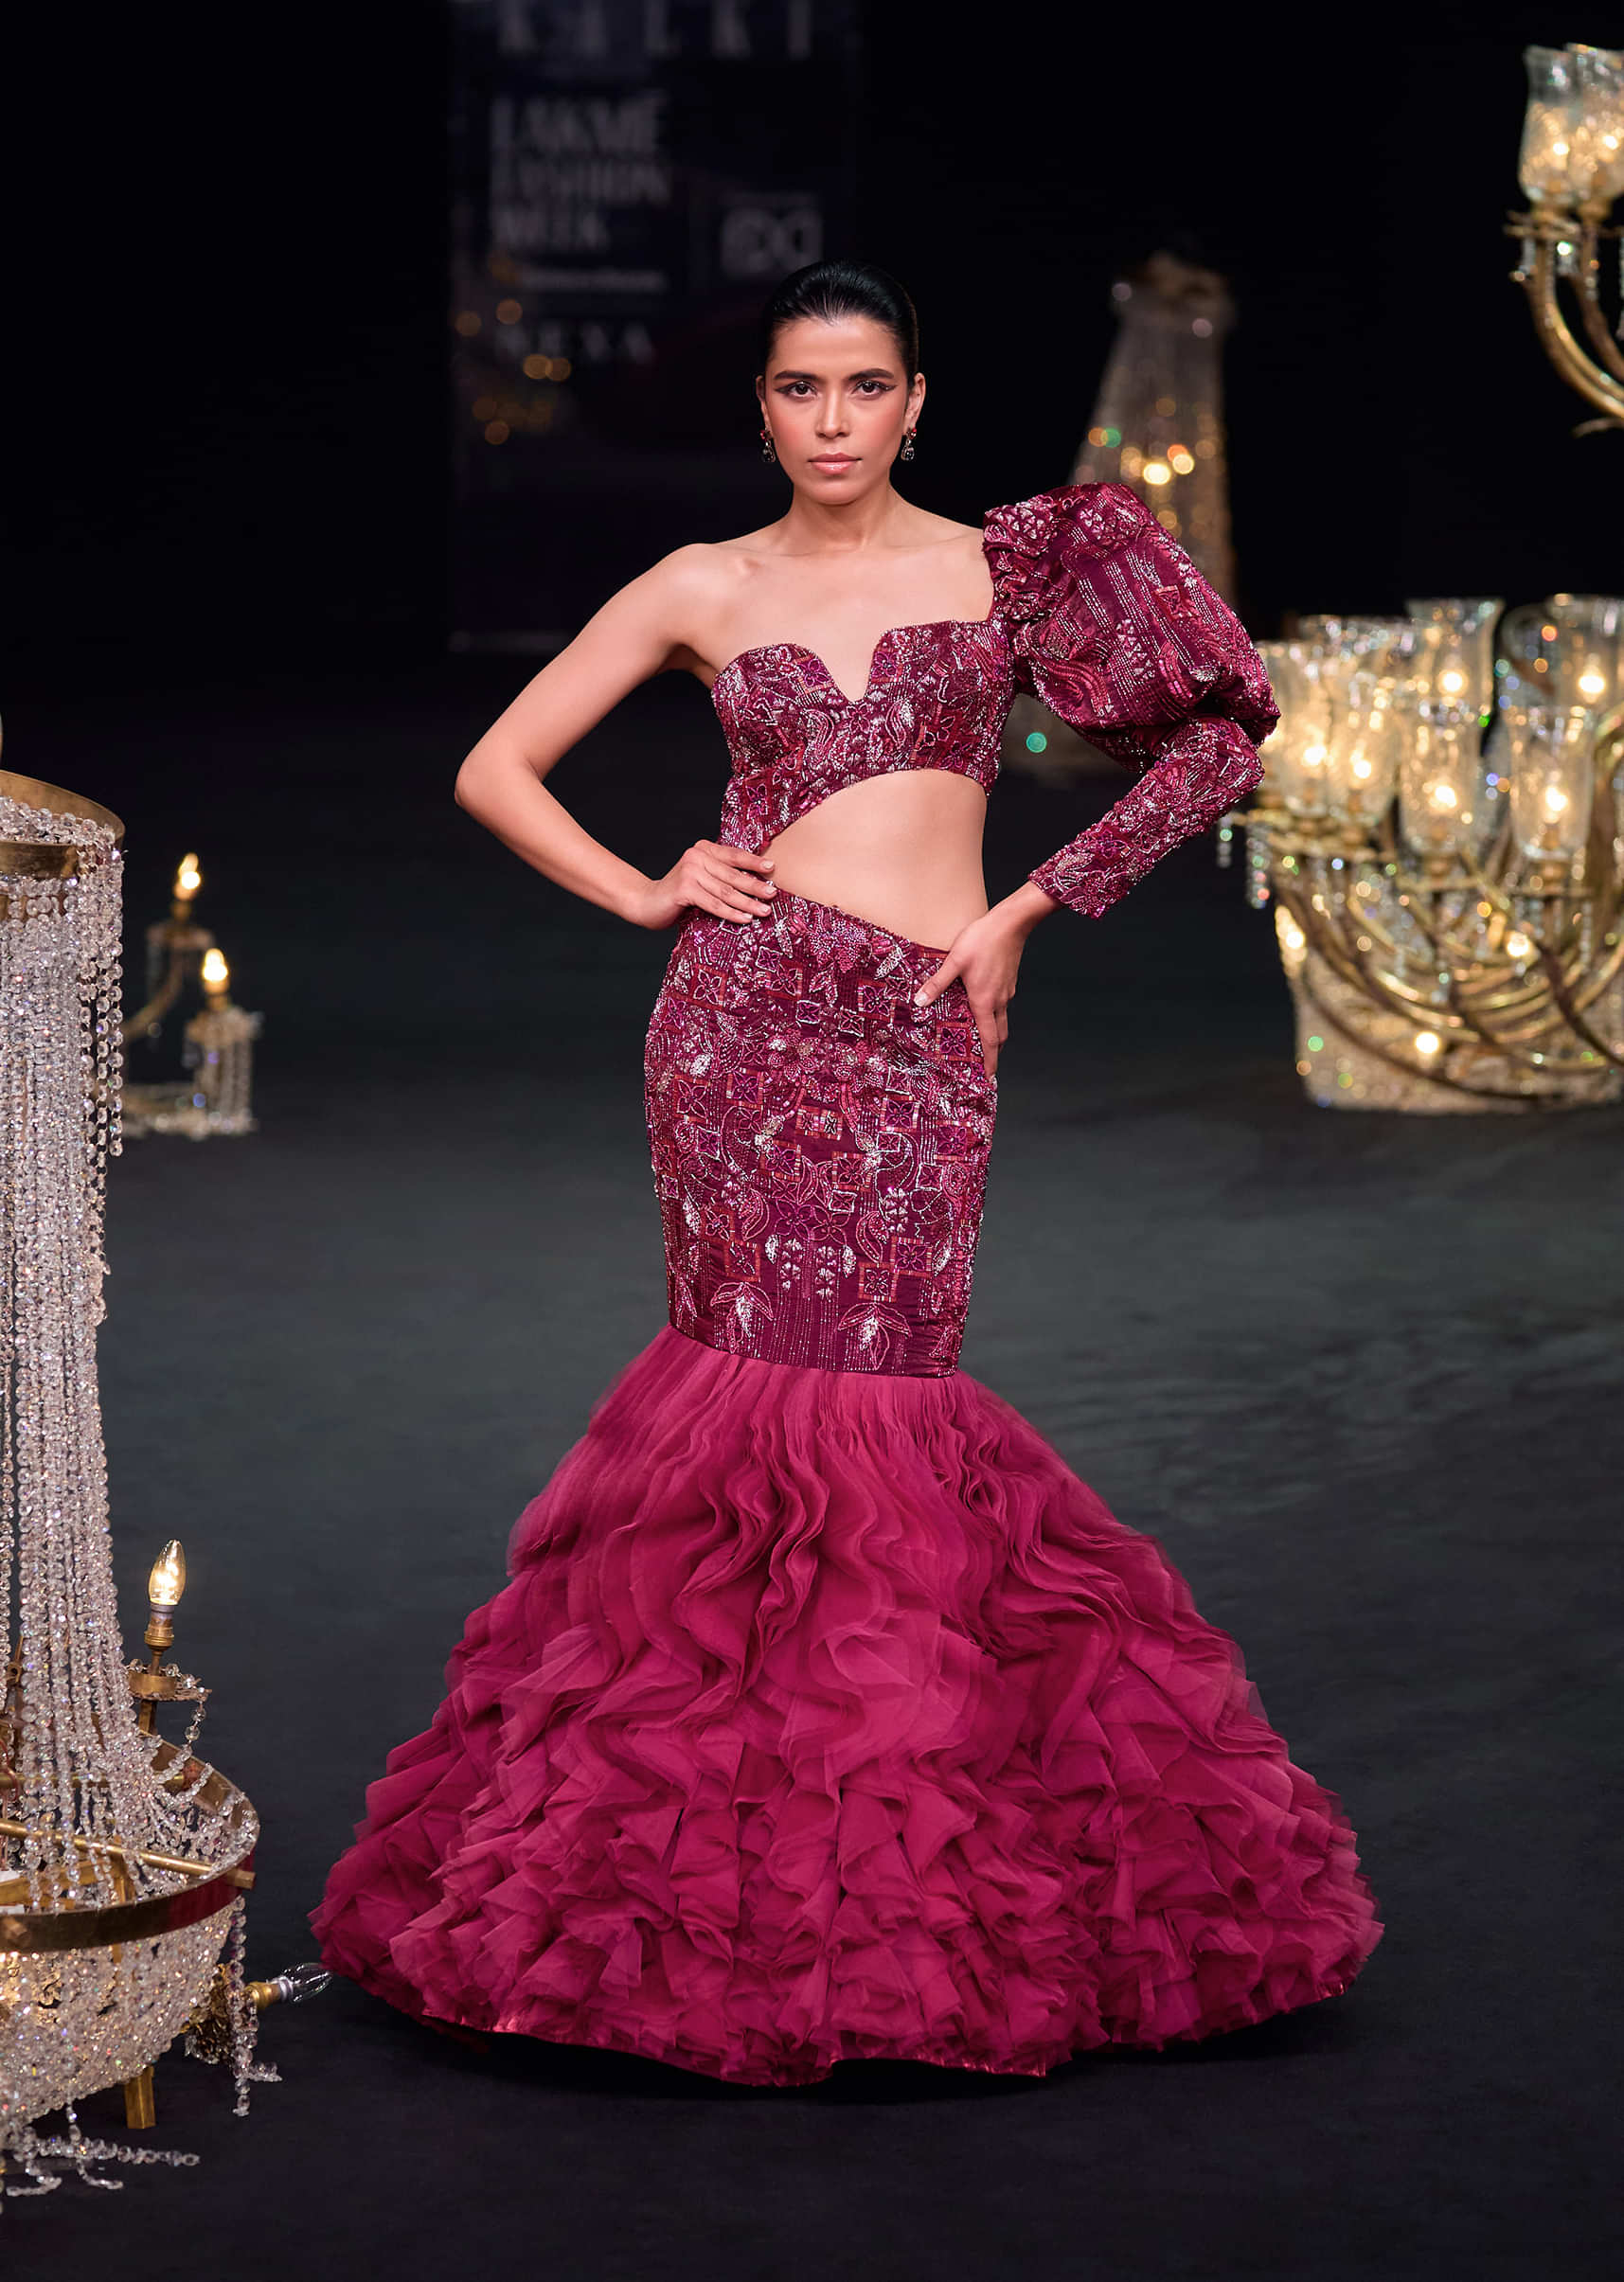 Buy Wine Fish Cut One Shoulder Gown With 3D Organza Frills | KALKI 